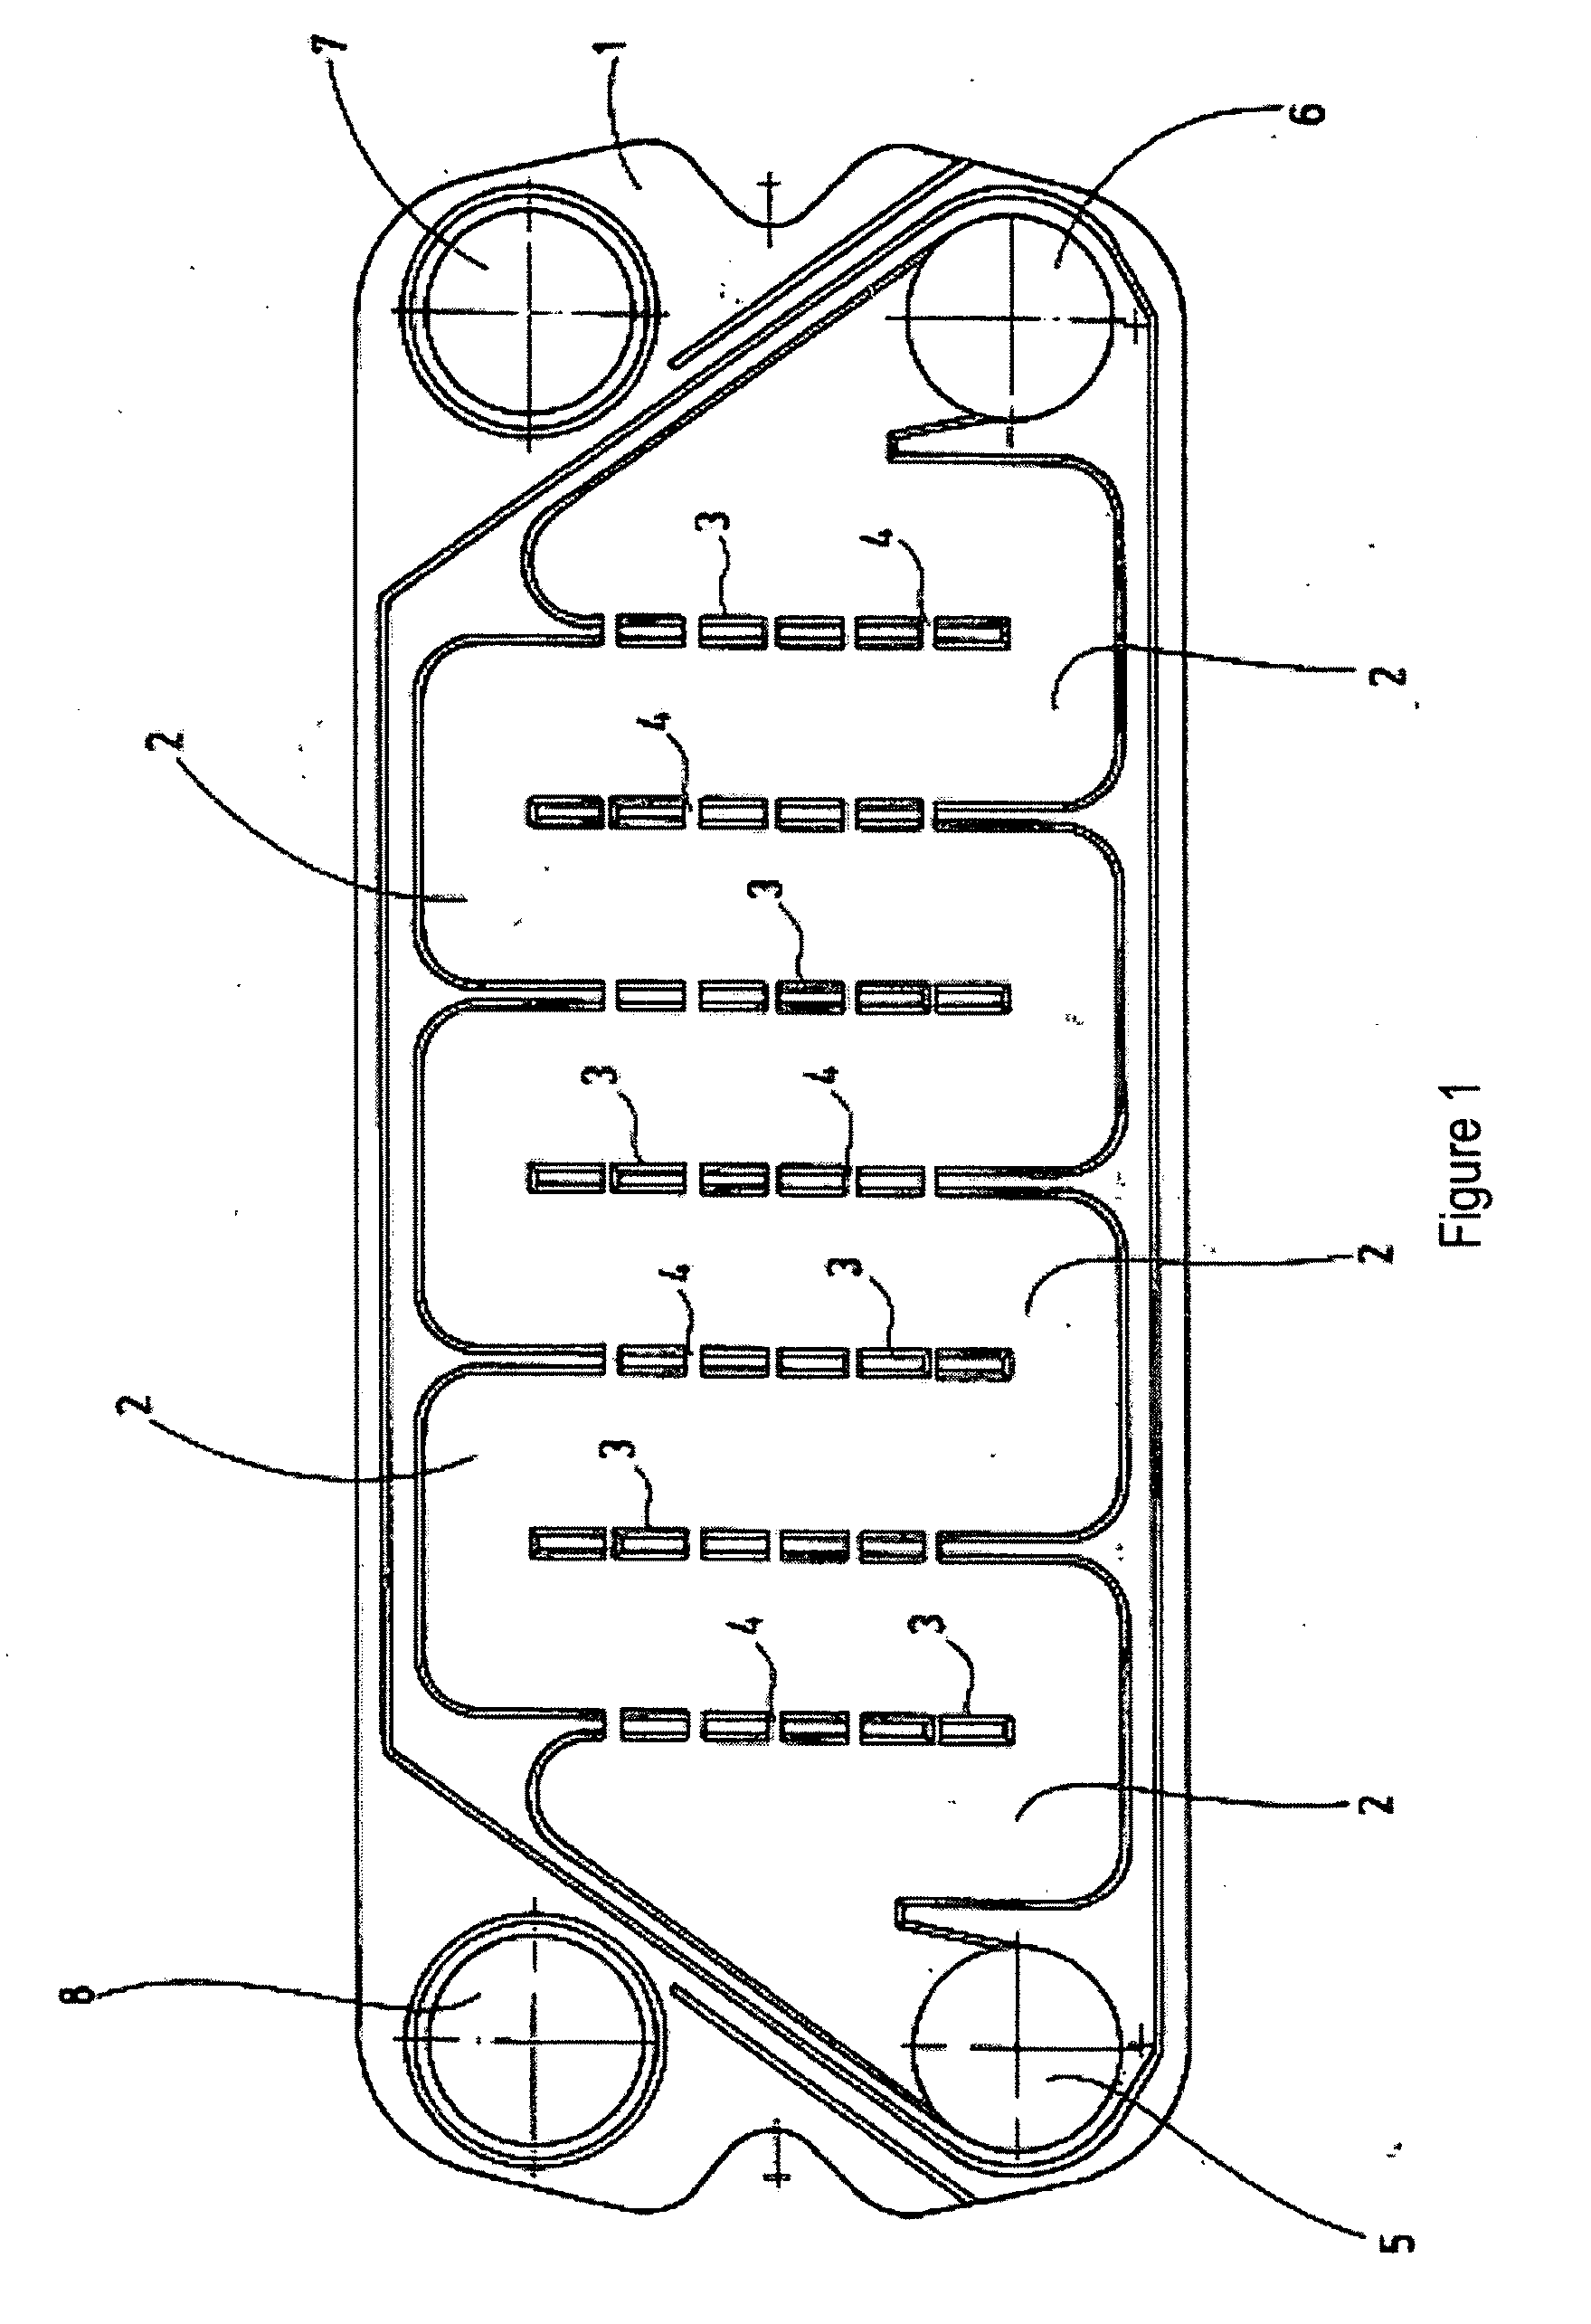 Plate Heat Exchanger, Method for Its Production, and Its Use